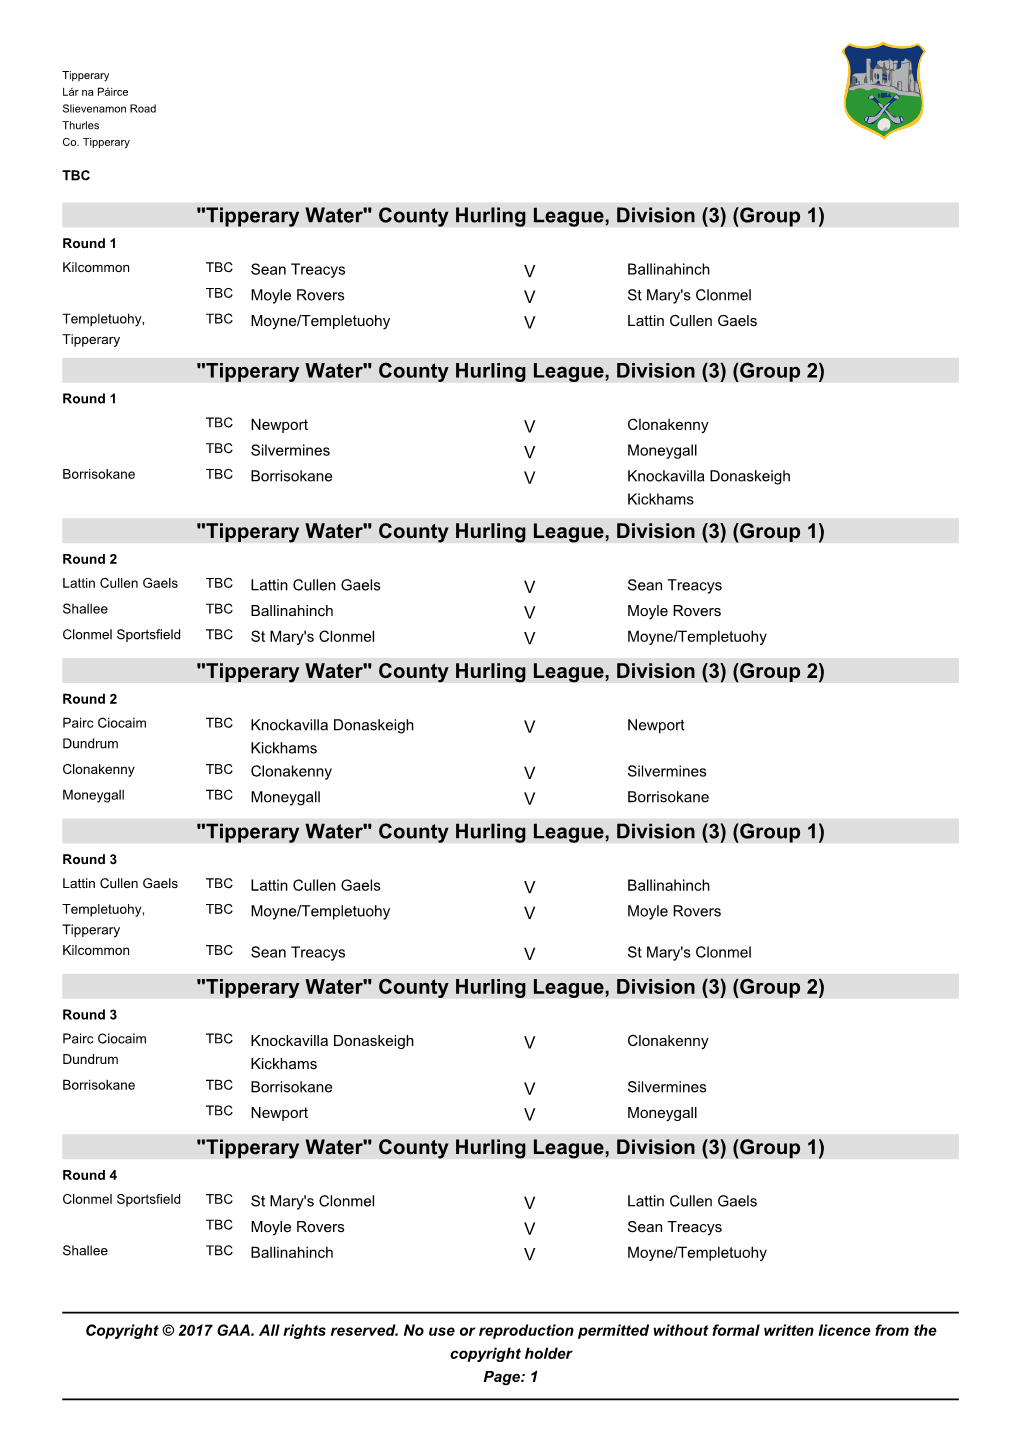 Tipperary Water County Hurling League Div 3 2017